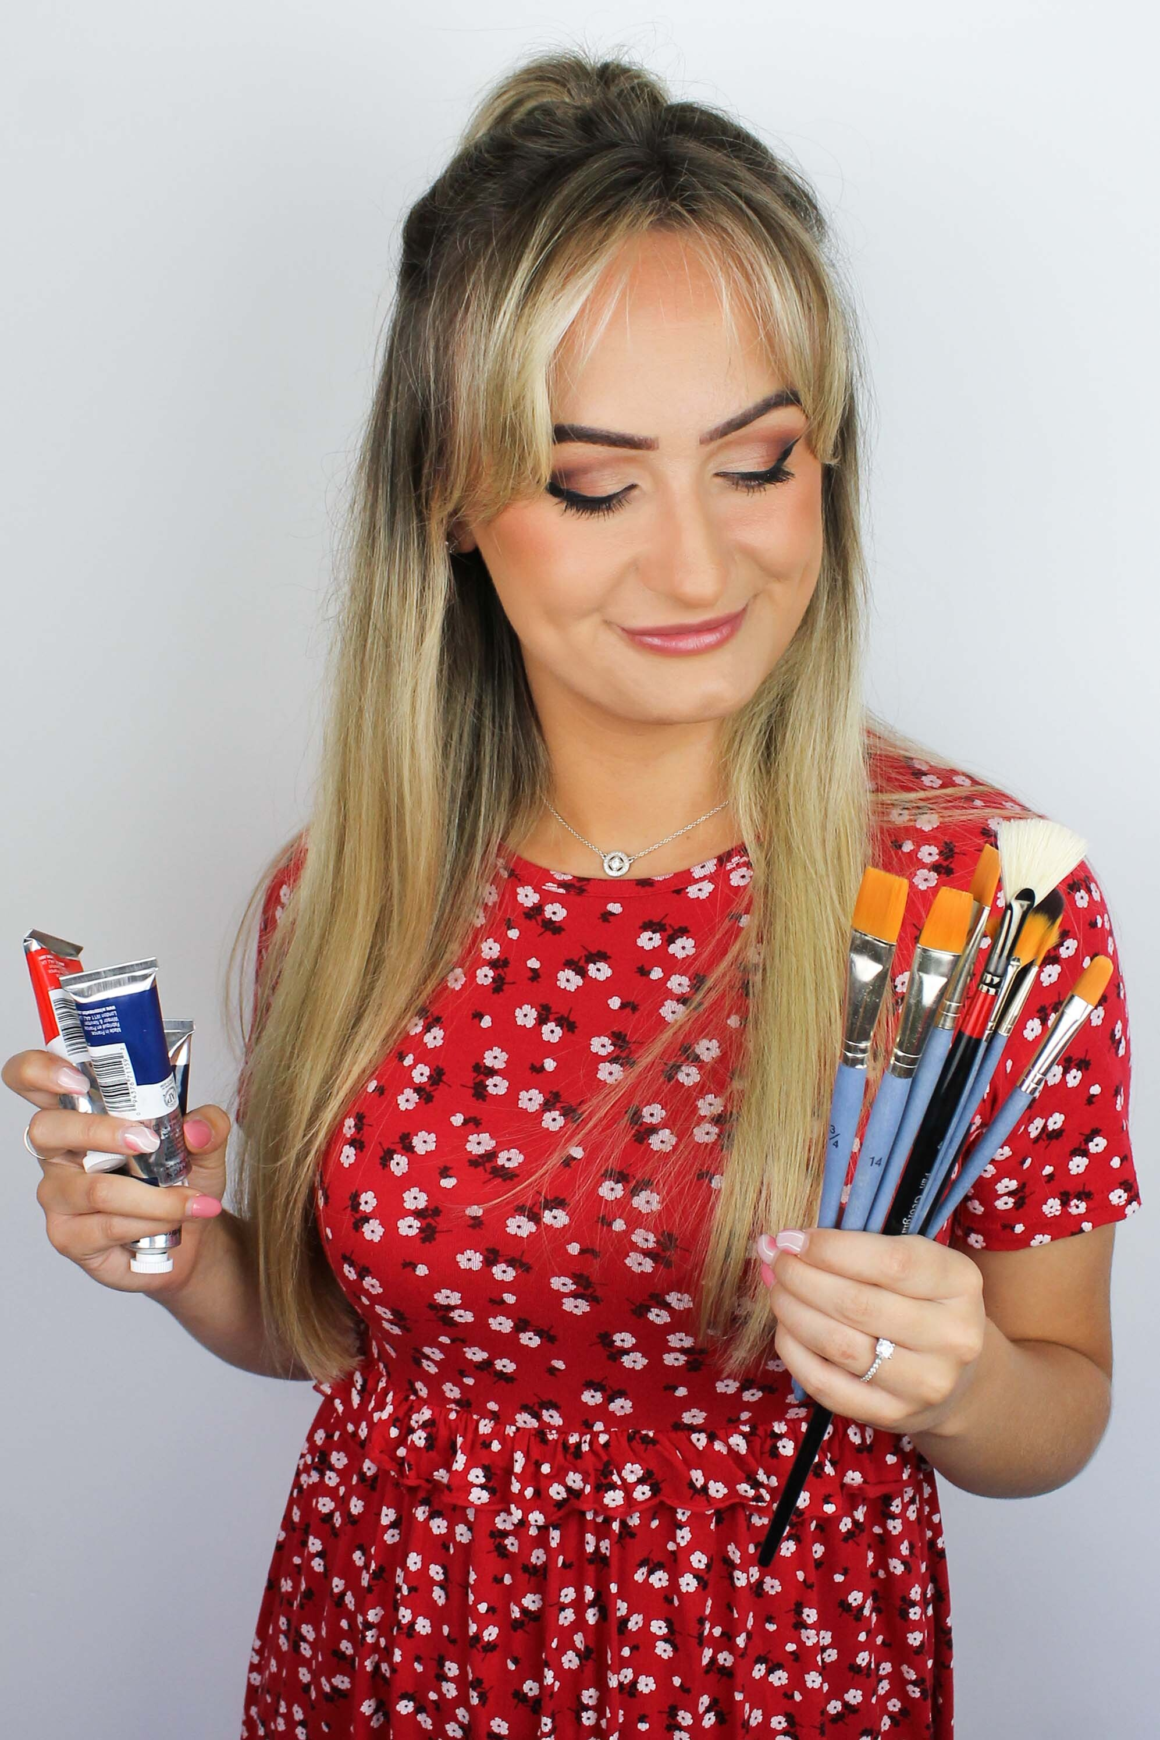 Megan Eves (Design Executive) wearing a red dress holding paint brushes in hand, photo taken at Prime Appointments HQ in Witham 2